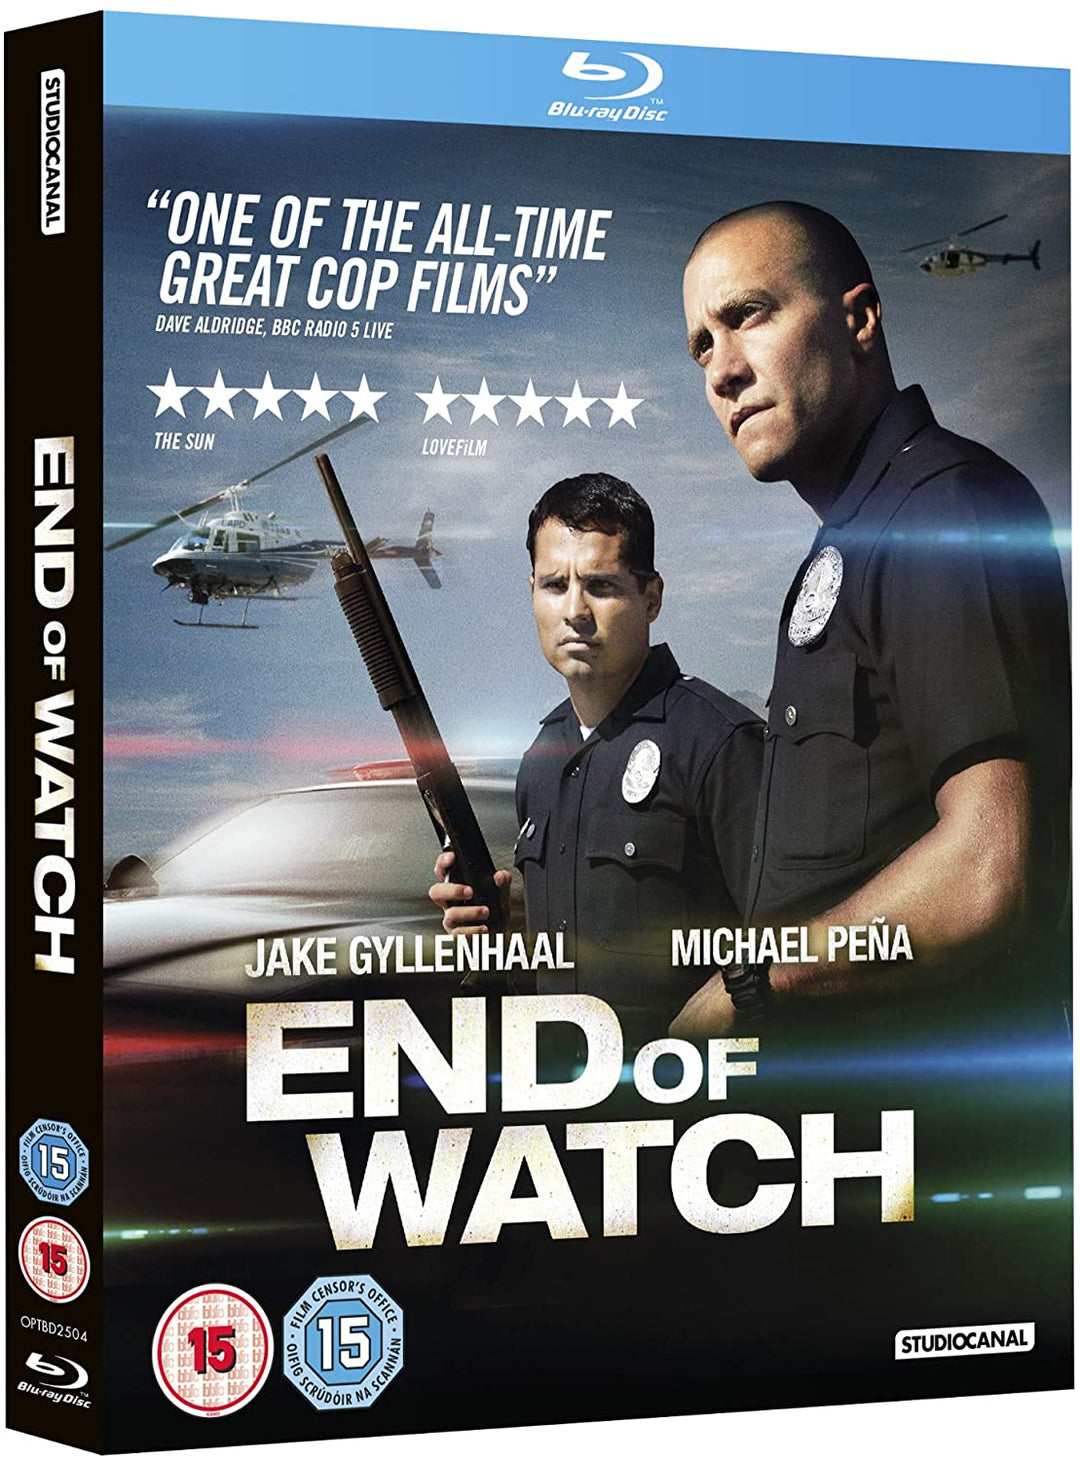 End Of Watch [2012] - Action/Crime [Blu-ray]